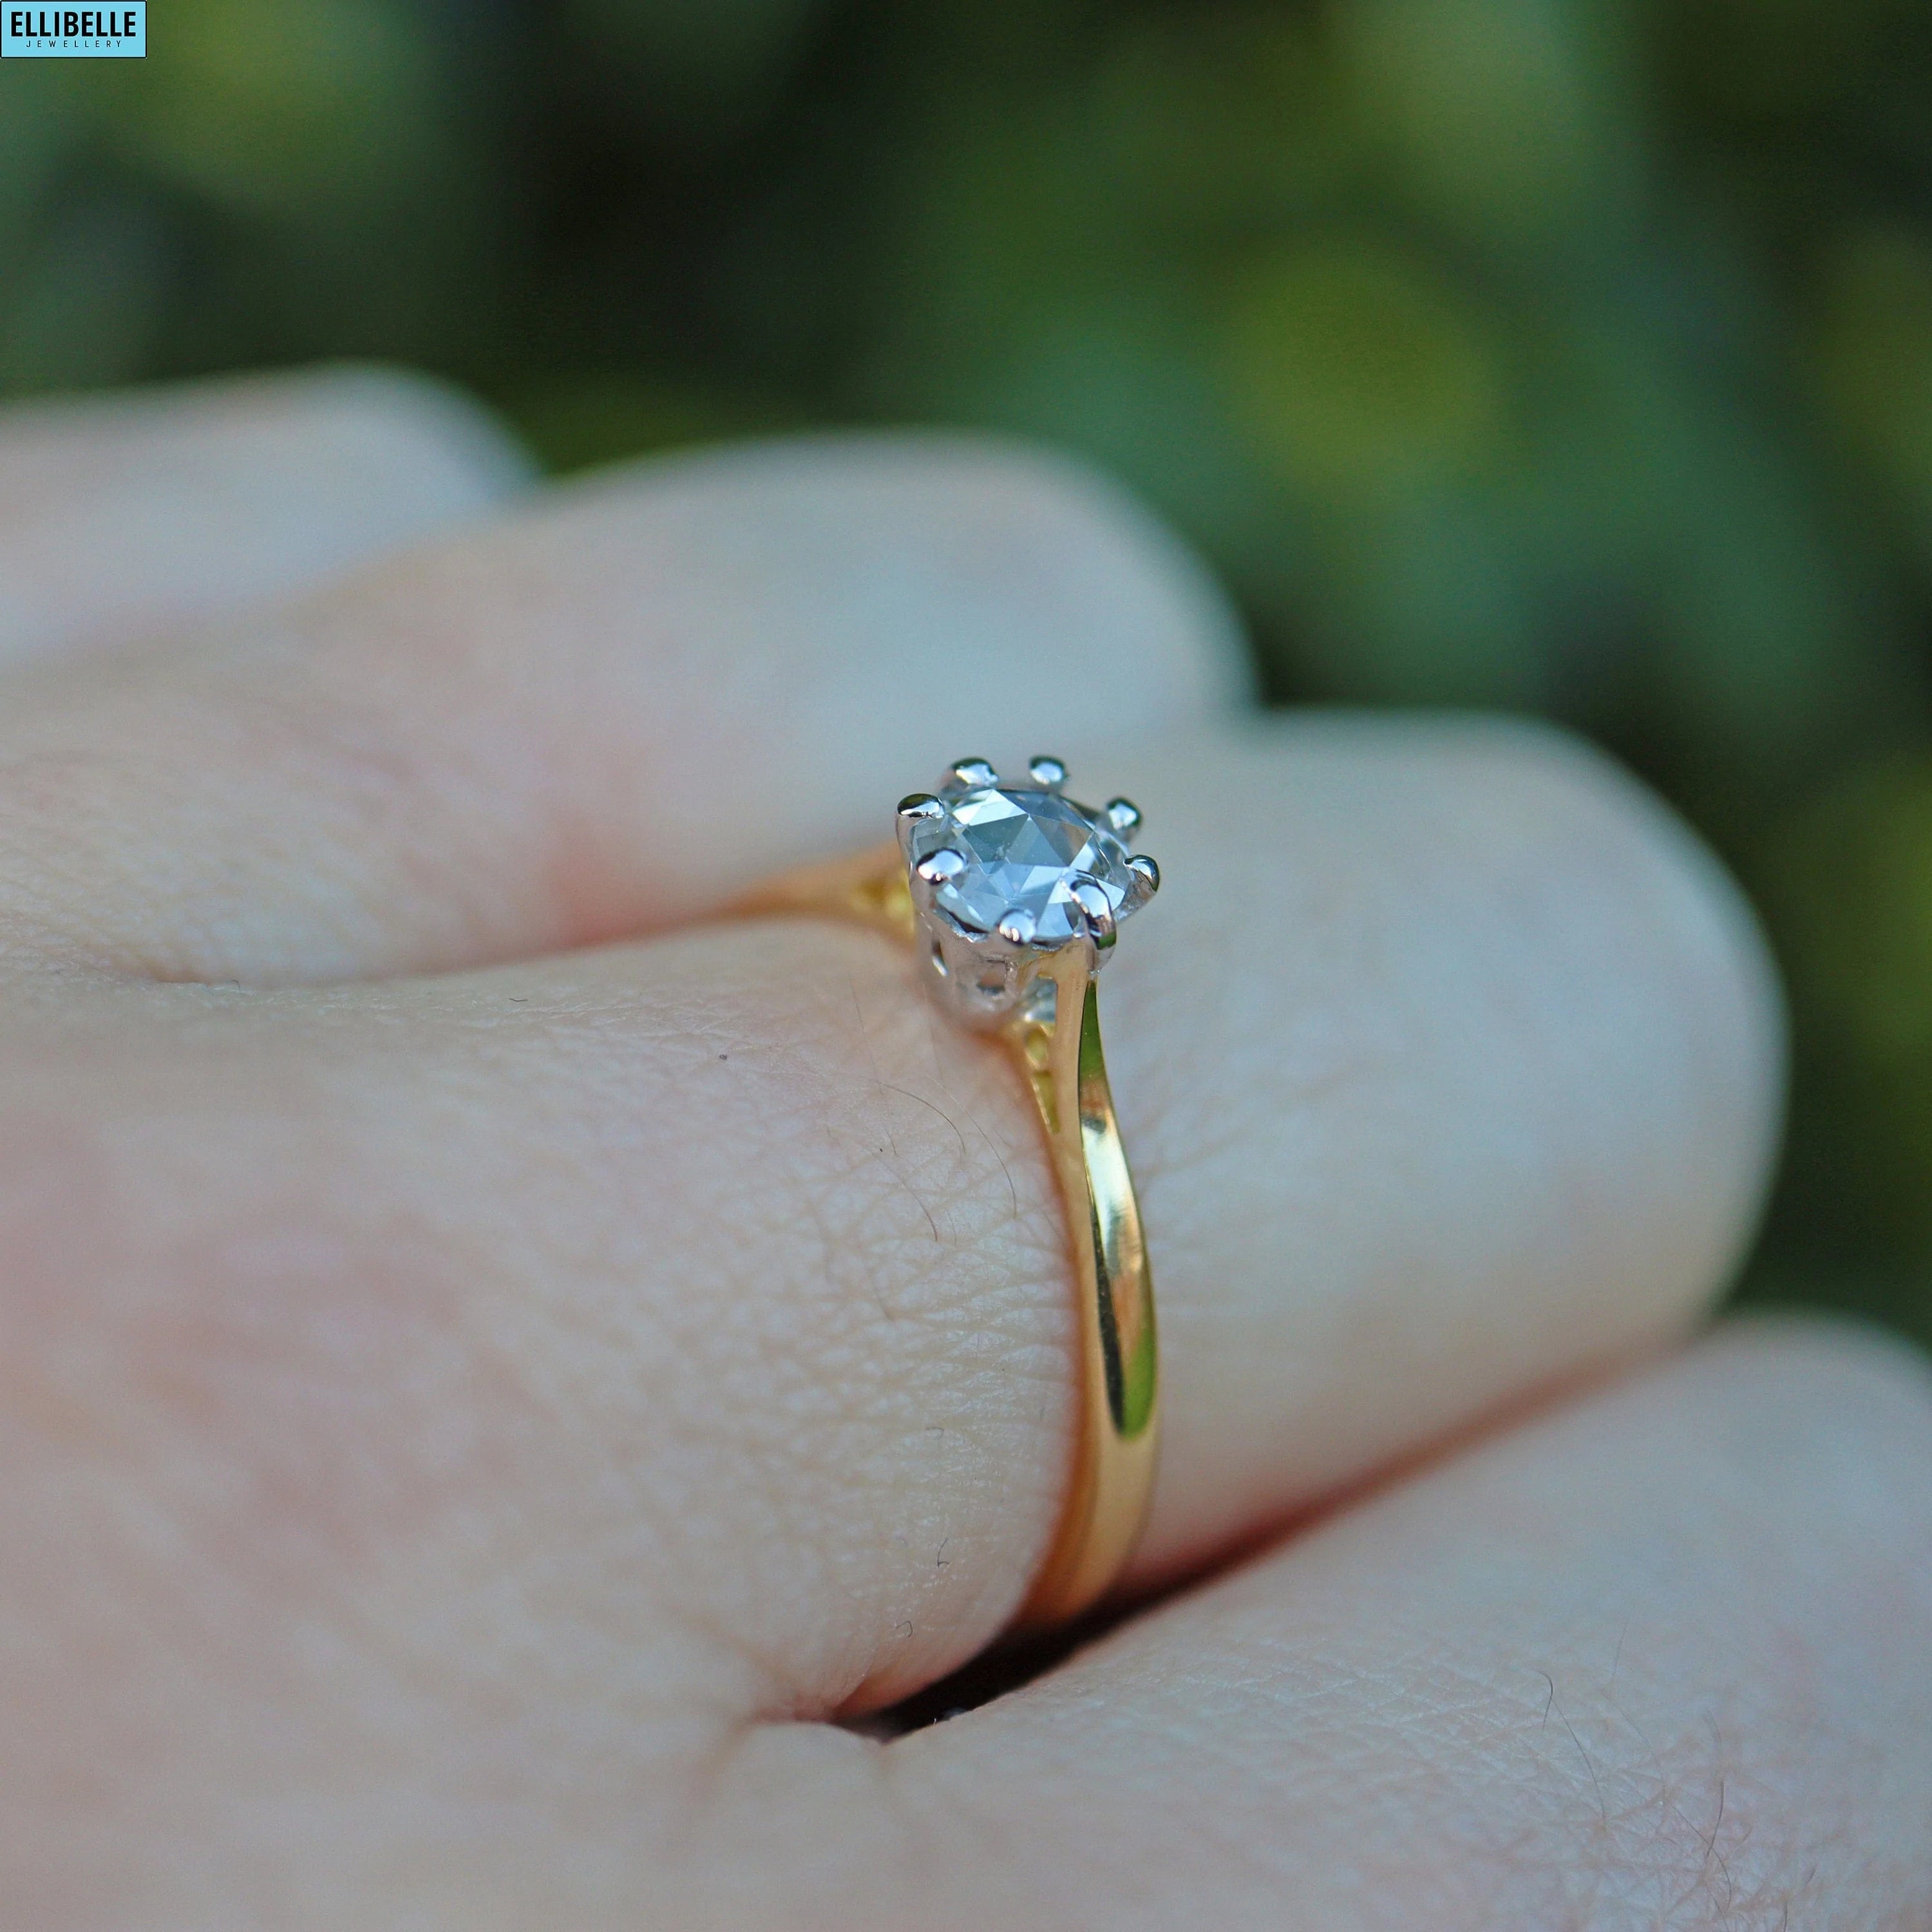 18ct Gold Rose Cut Diamond Solitaire Ring